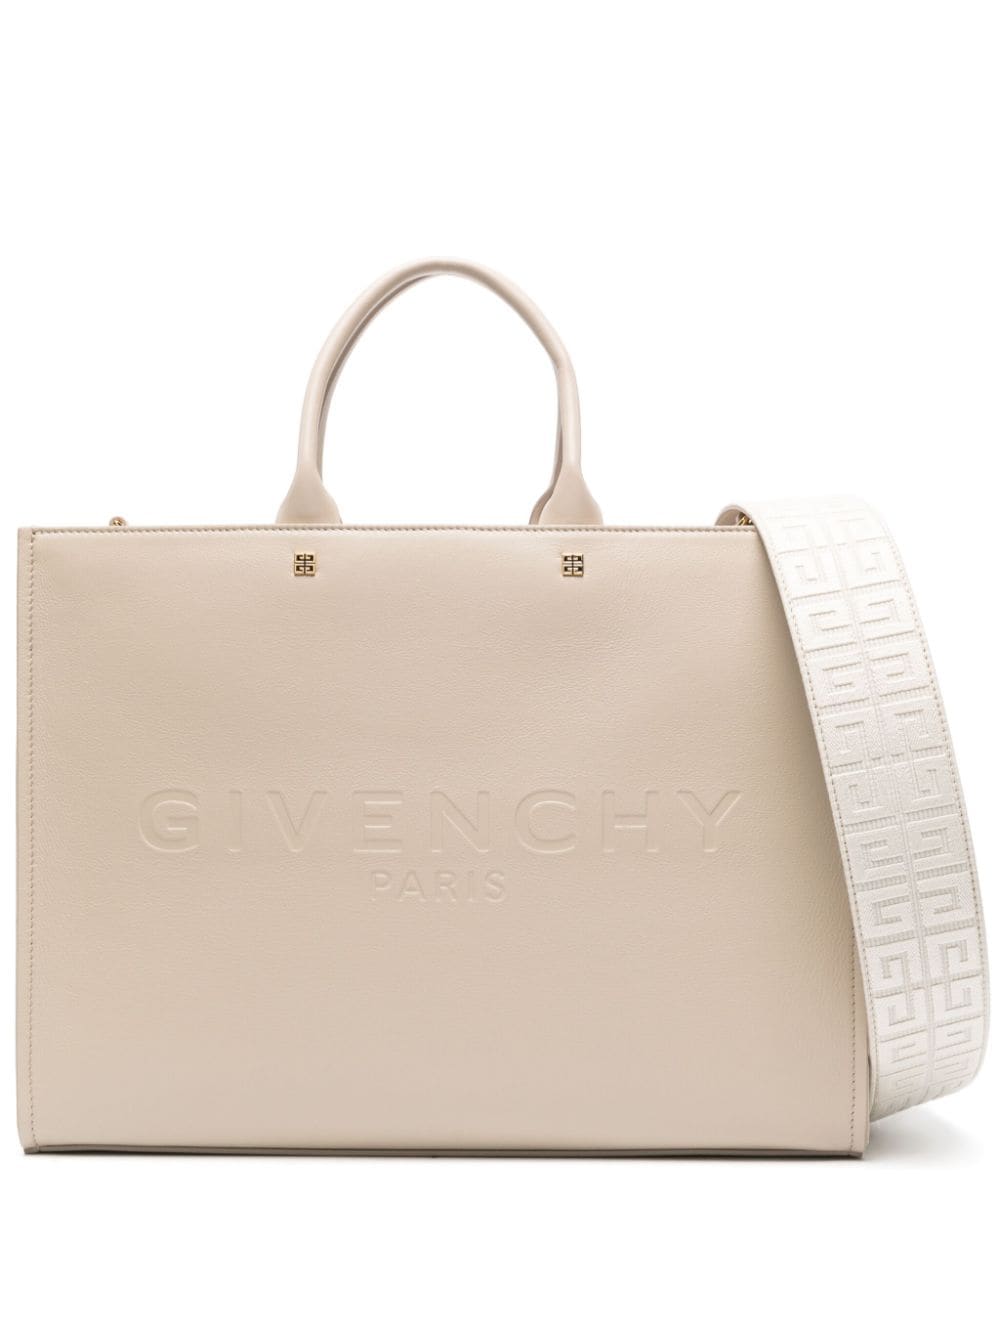 Givenchy Mittelgroßer G-Tote Shopper - Nude von Givenchy